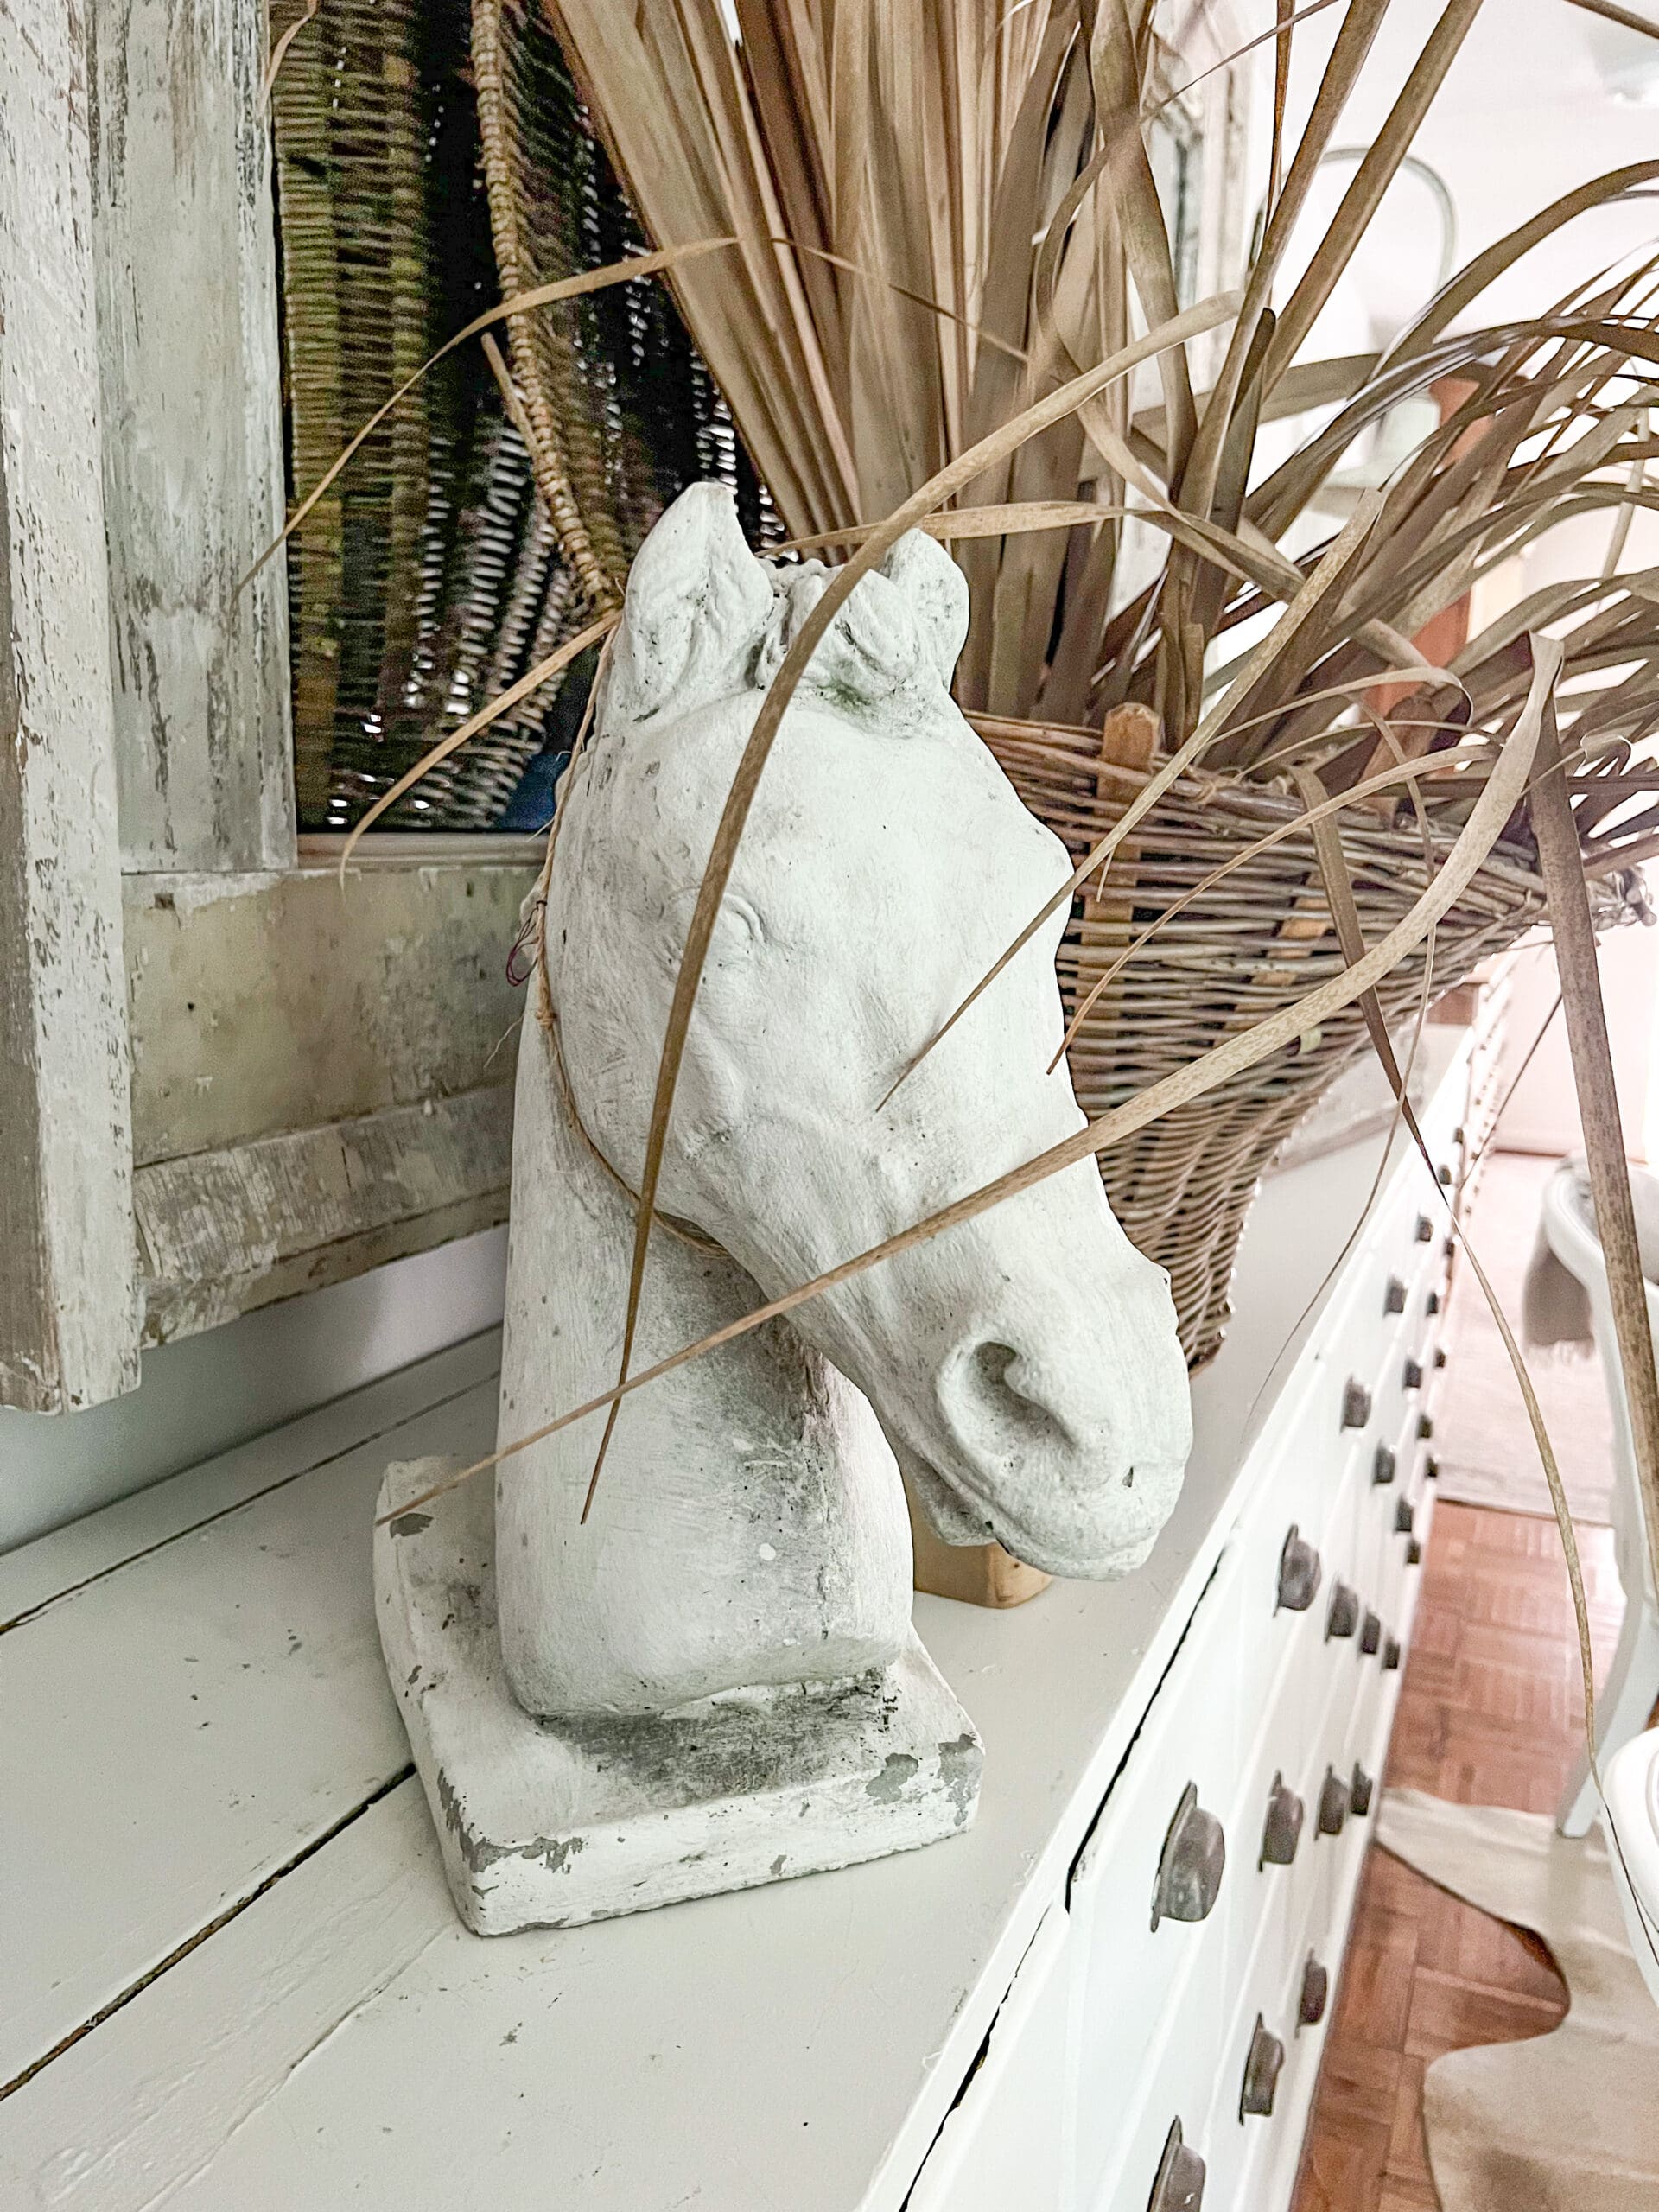 White concrete horse head styled next to a brown woven basket with dried greenery